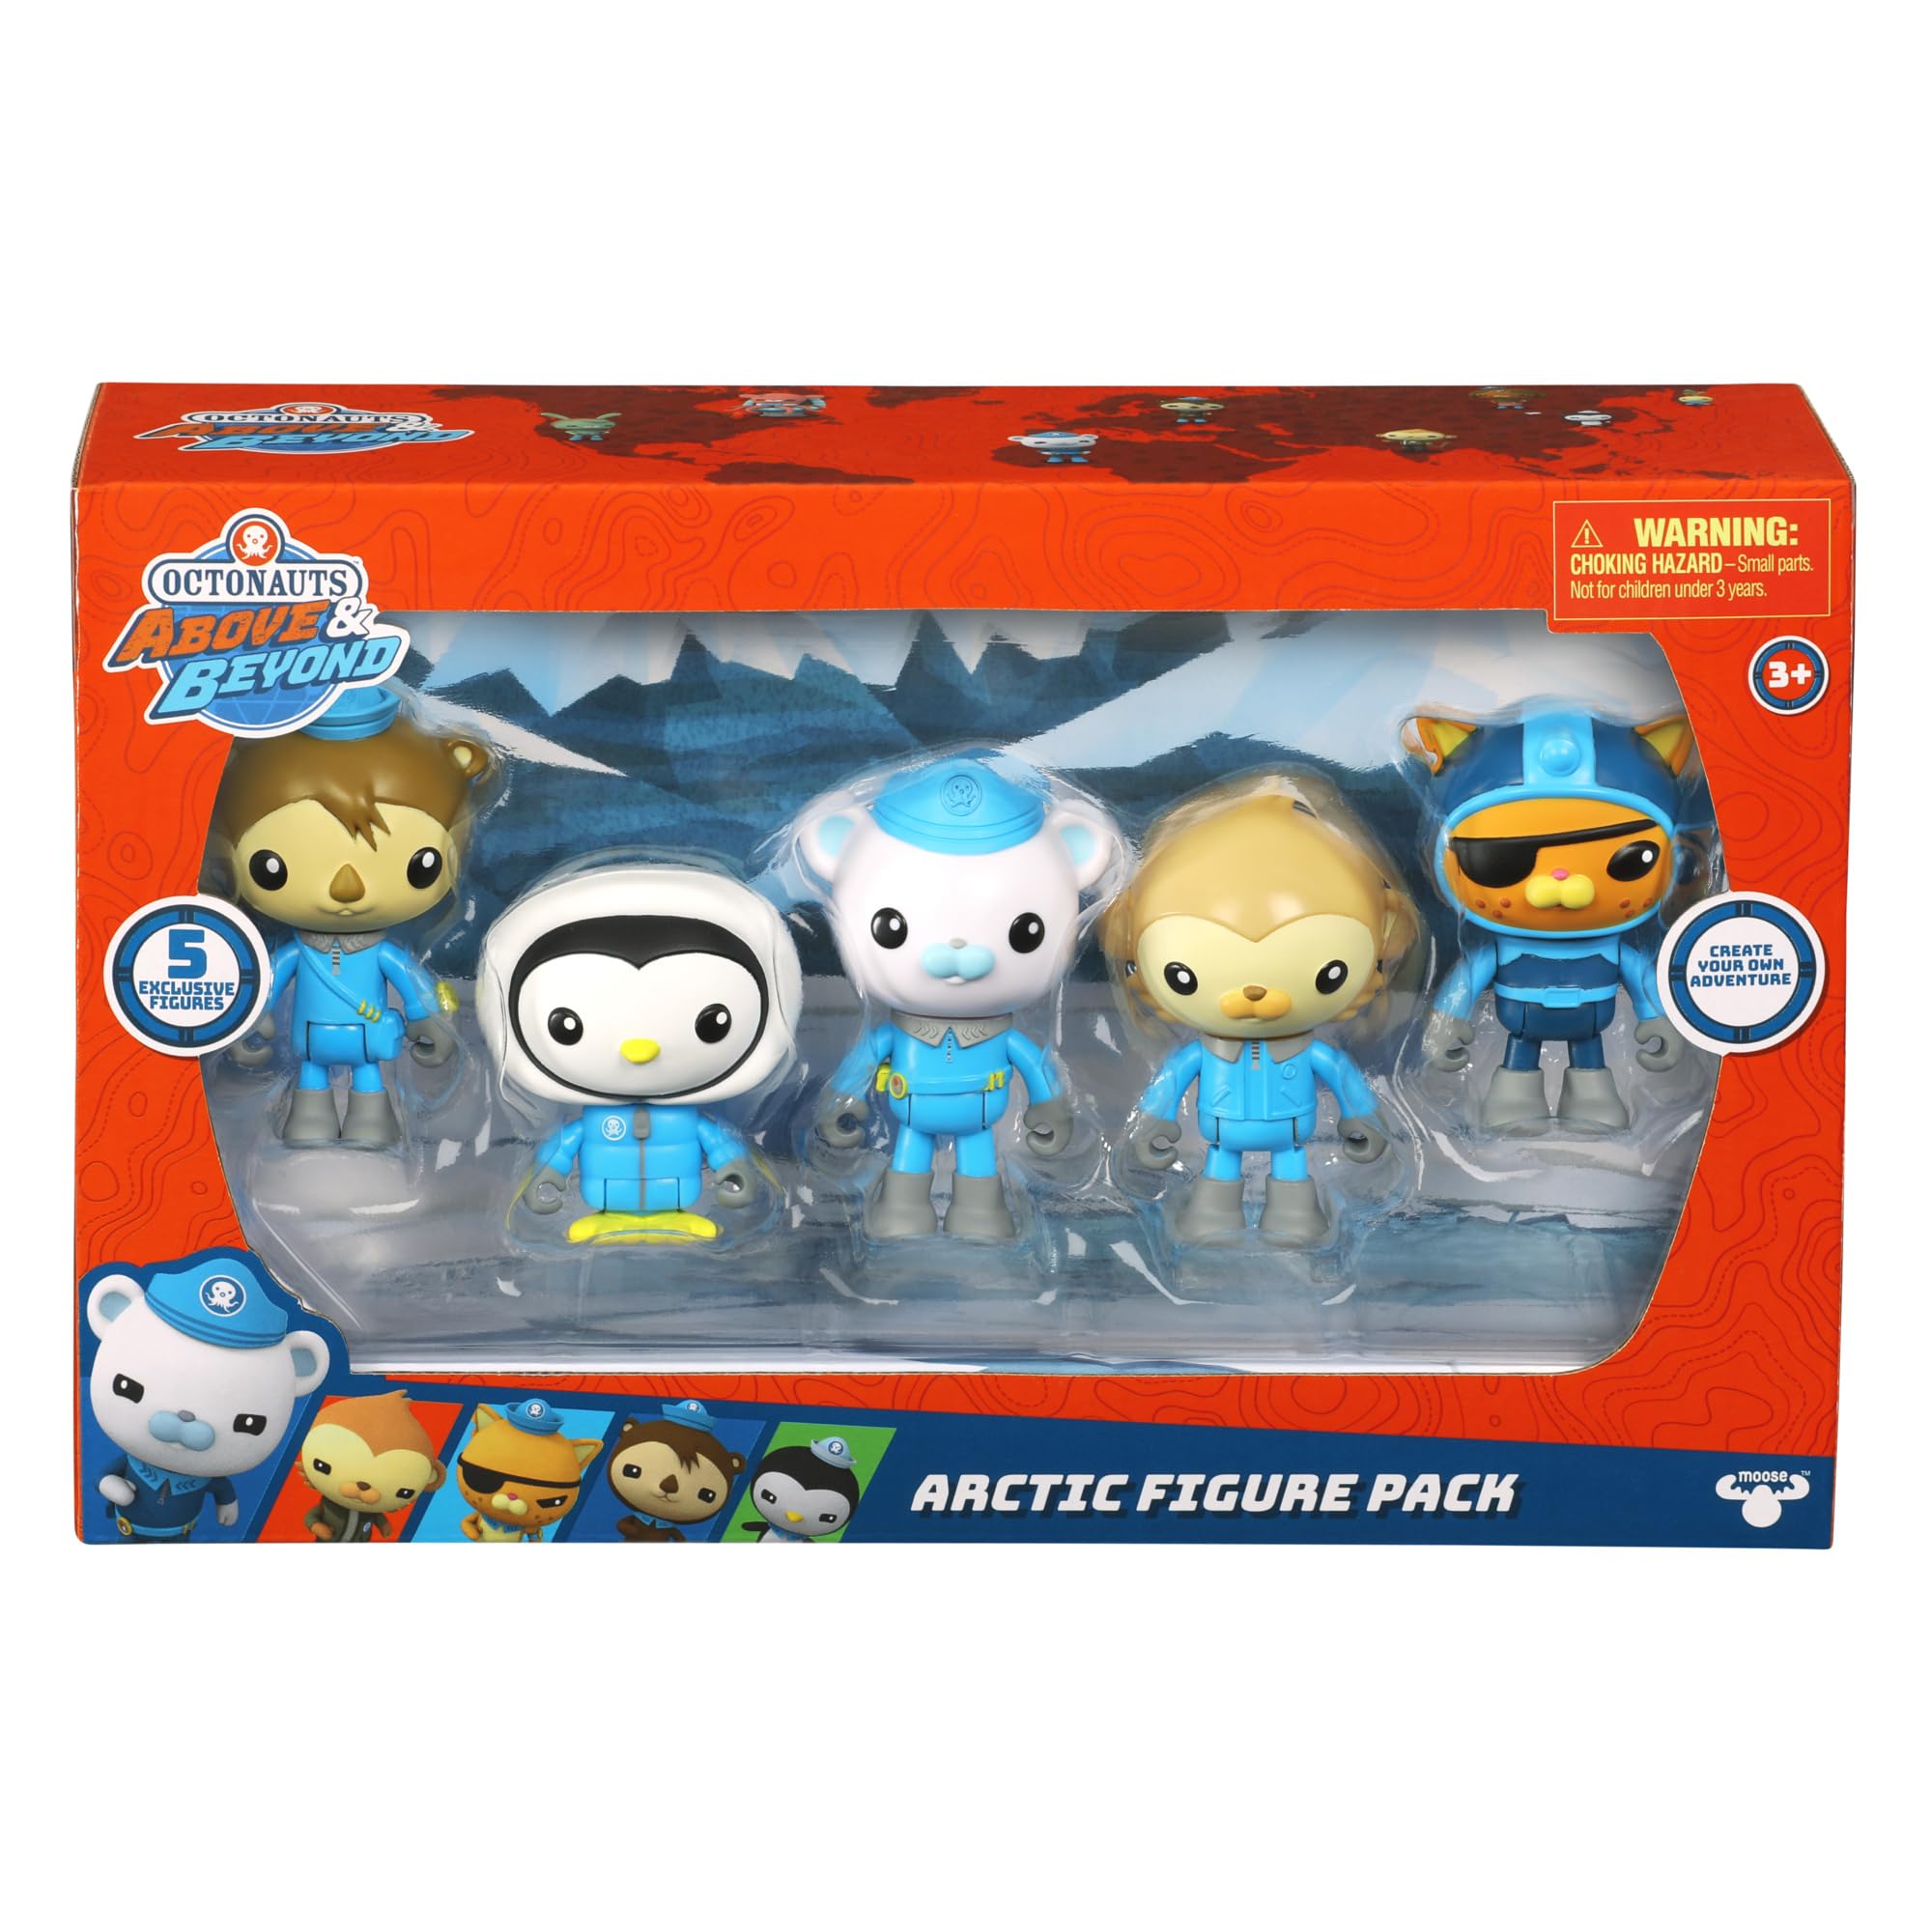 Octonauts Above & Beyond, Toy Figure 5 Pack. Exclusive Arctic Theme, Includes Captain Barnacles, Kwazii, Paani, Shellington and Peso | Amazon Exclusive